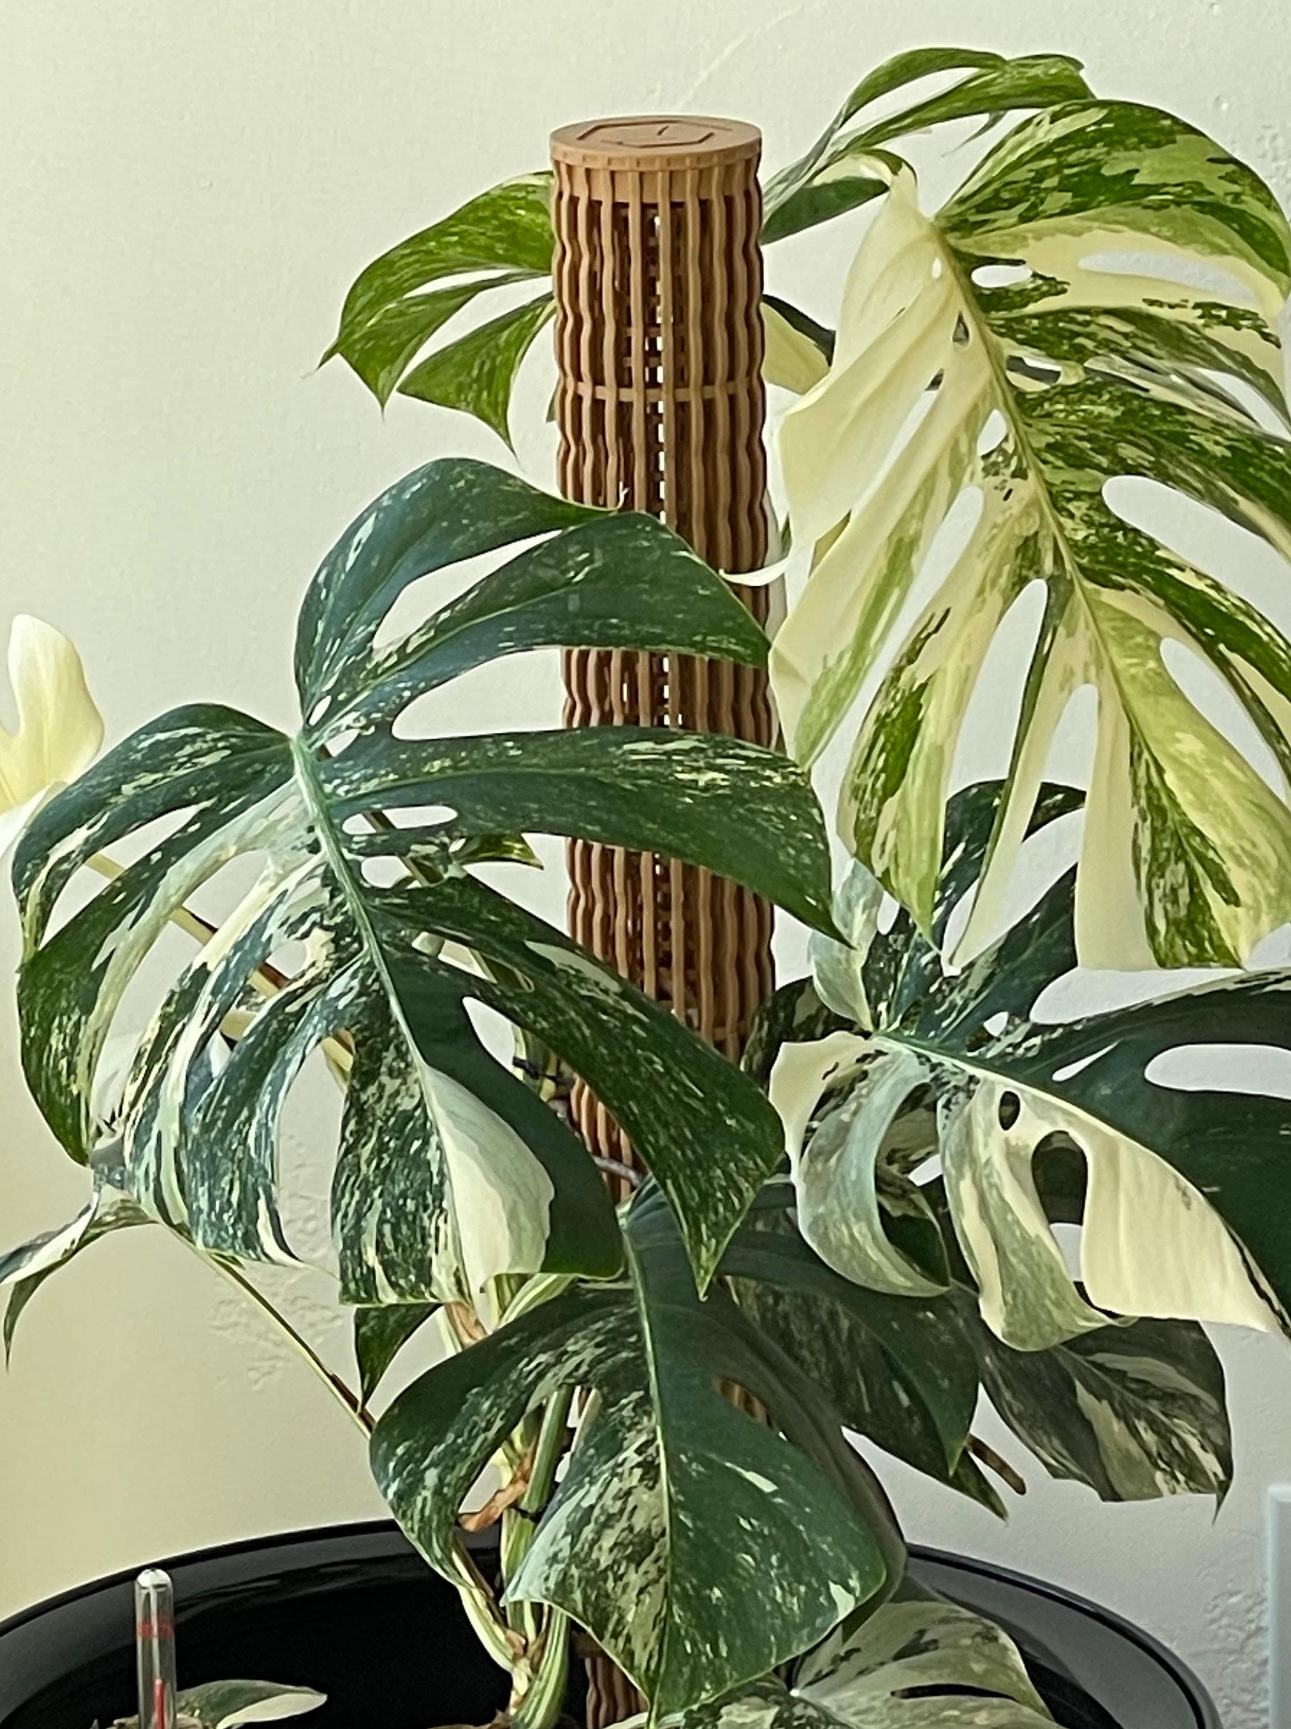 Moss pole for monstera -  France